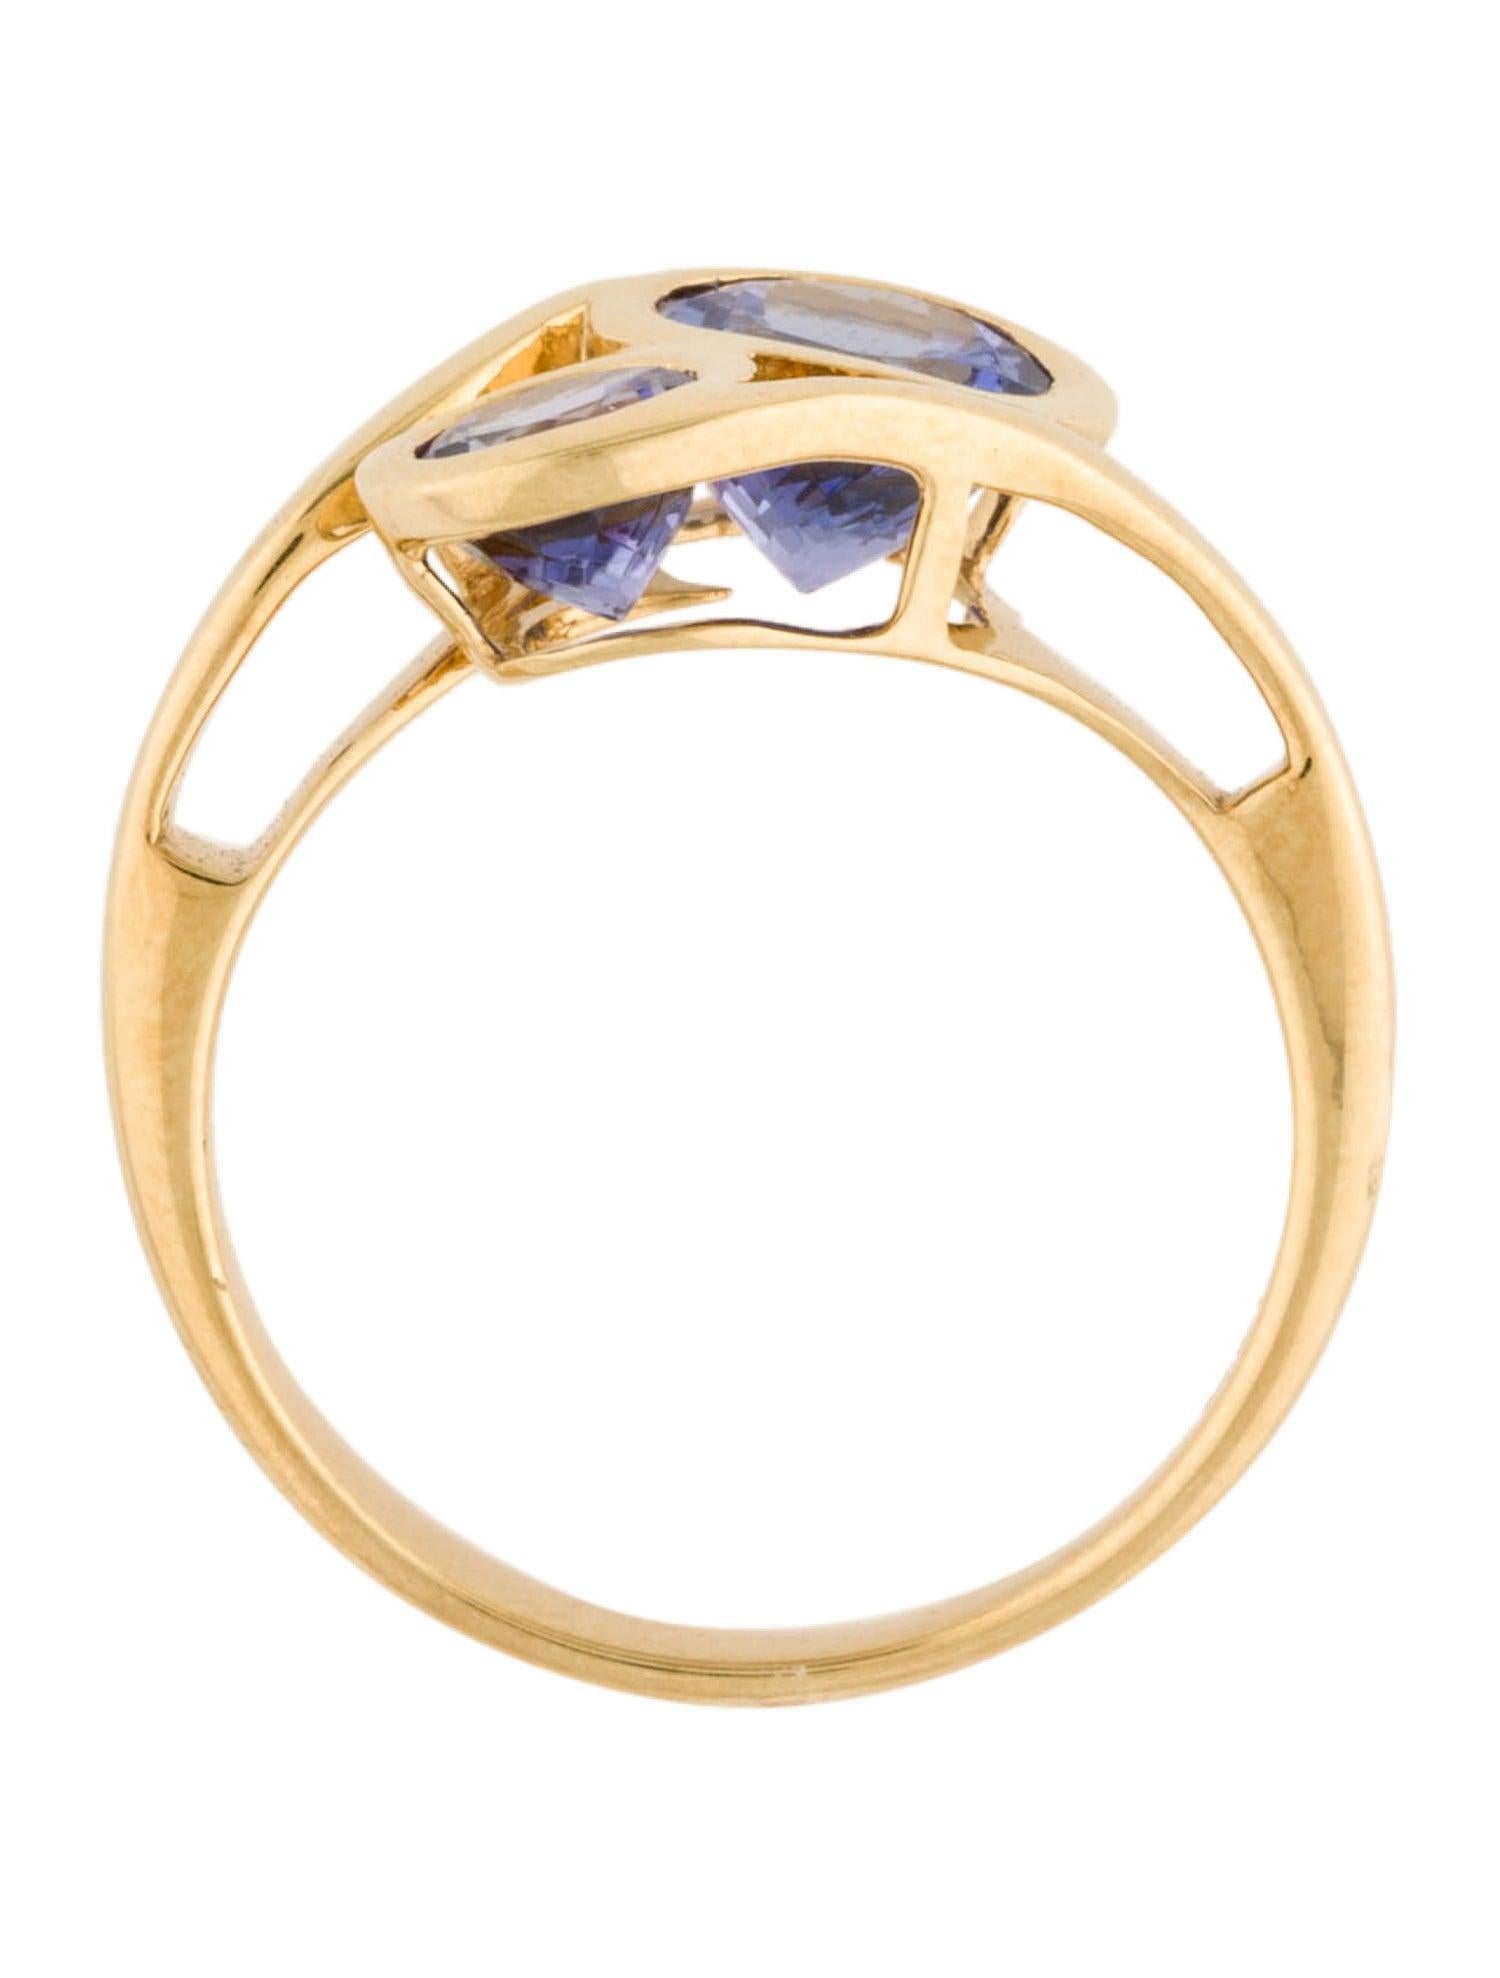 Luxurious 18K Tanzanite Cocktail Ring - 2.00ctw Gemstones - Size 7.75  Vintage In New Condition For Sale In Holtsville, NY